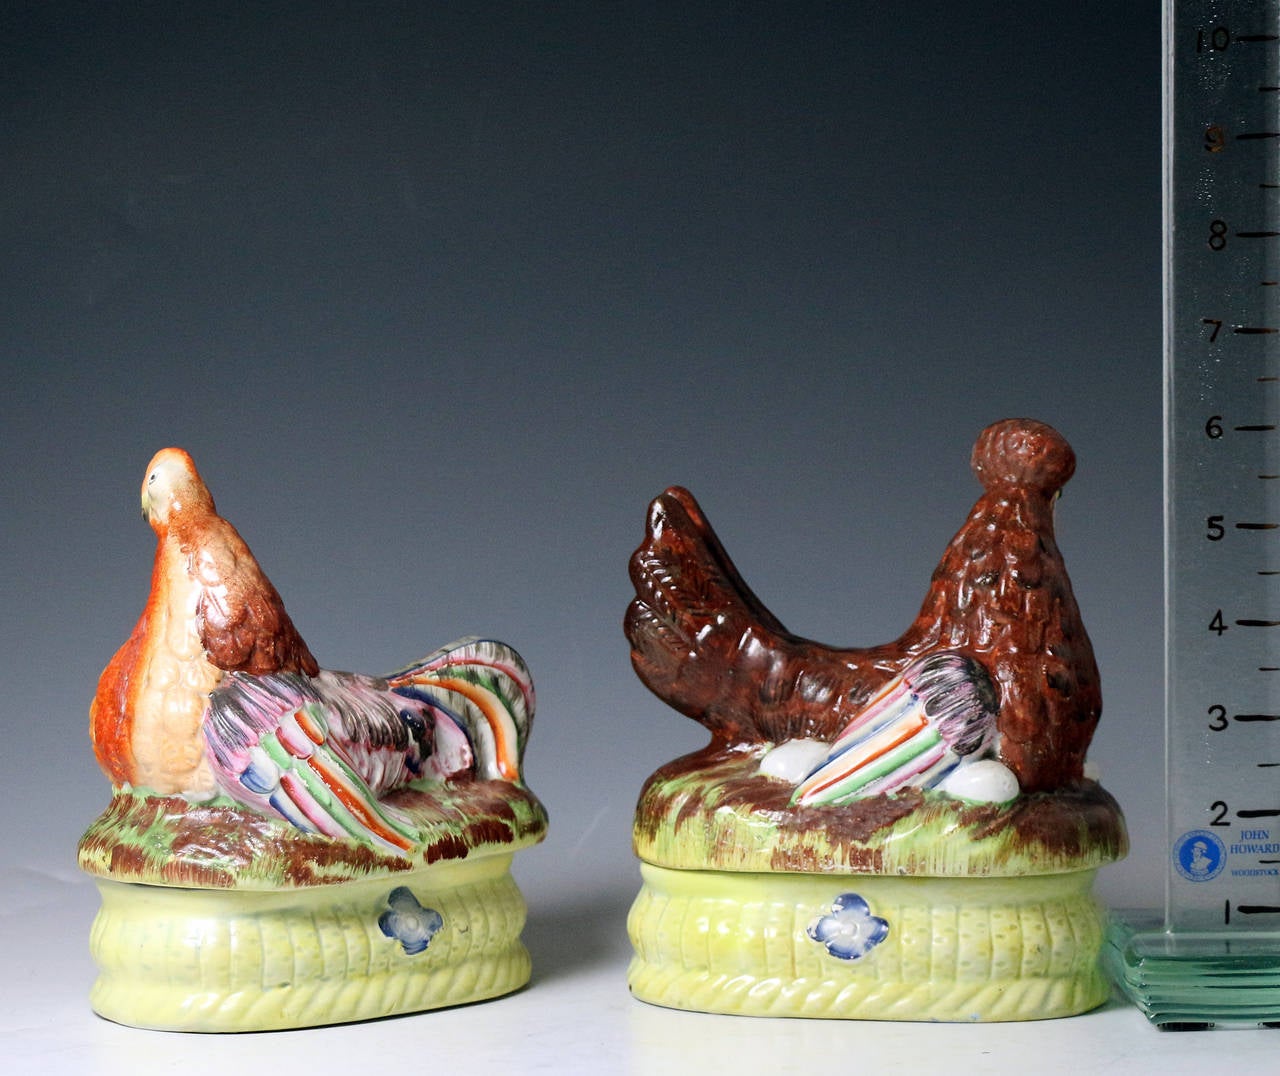 A rare pair of antique Staffordshire pottery figures of hens each sitting on yellow baskets with a blue flower. 
This pair brightly coloured and rather comical pair are the rarest form of hen on nests produced by the Staffordshire potters.